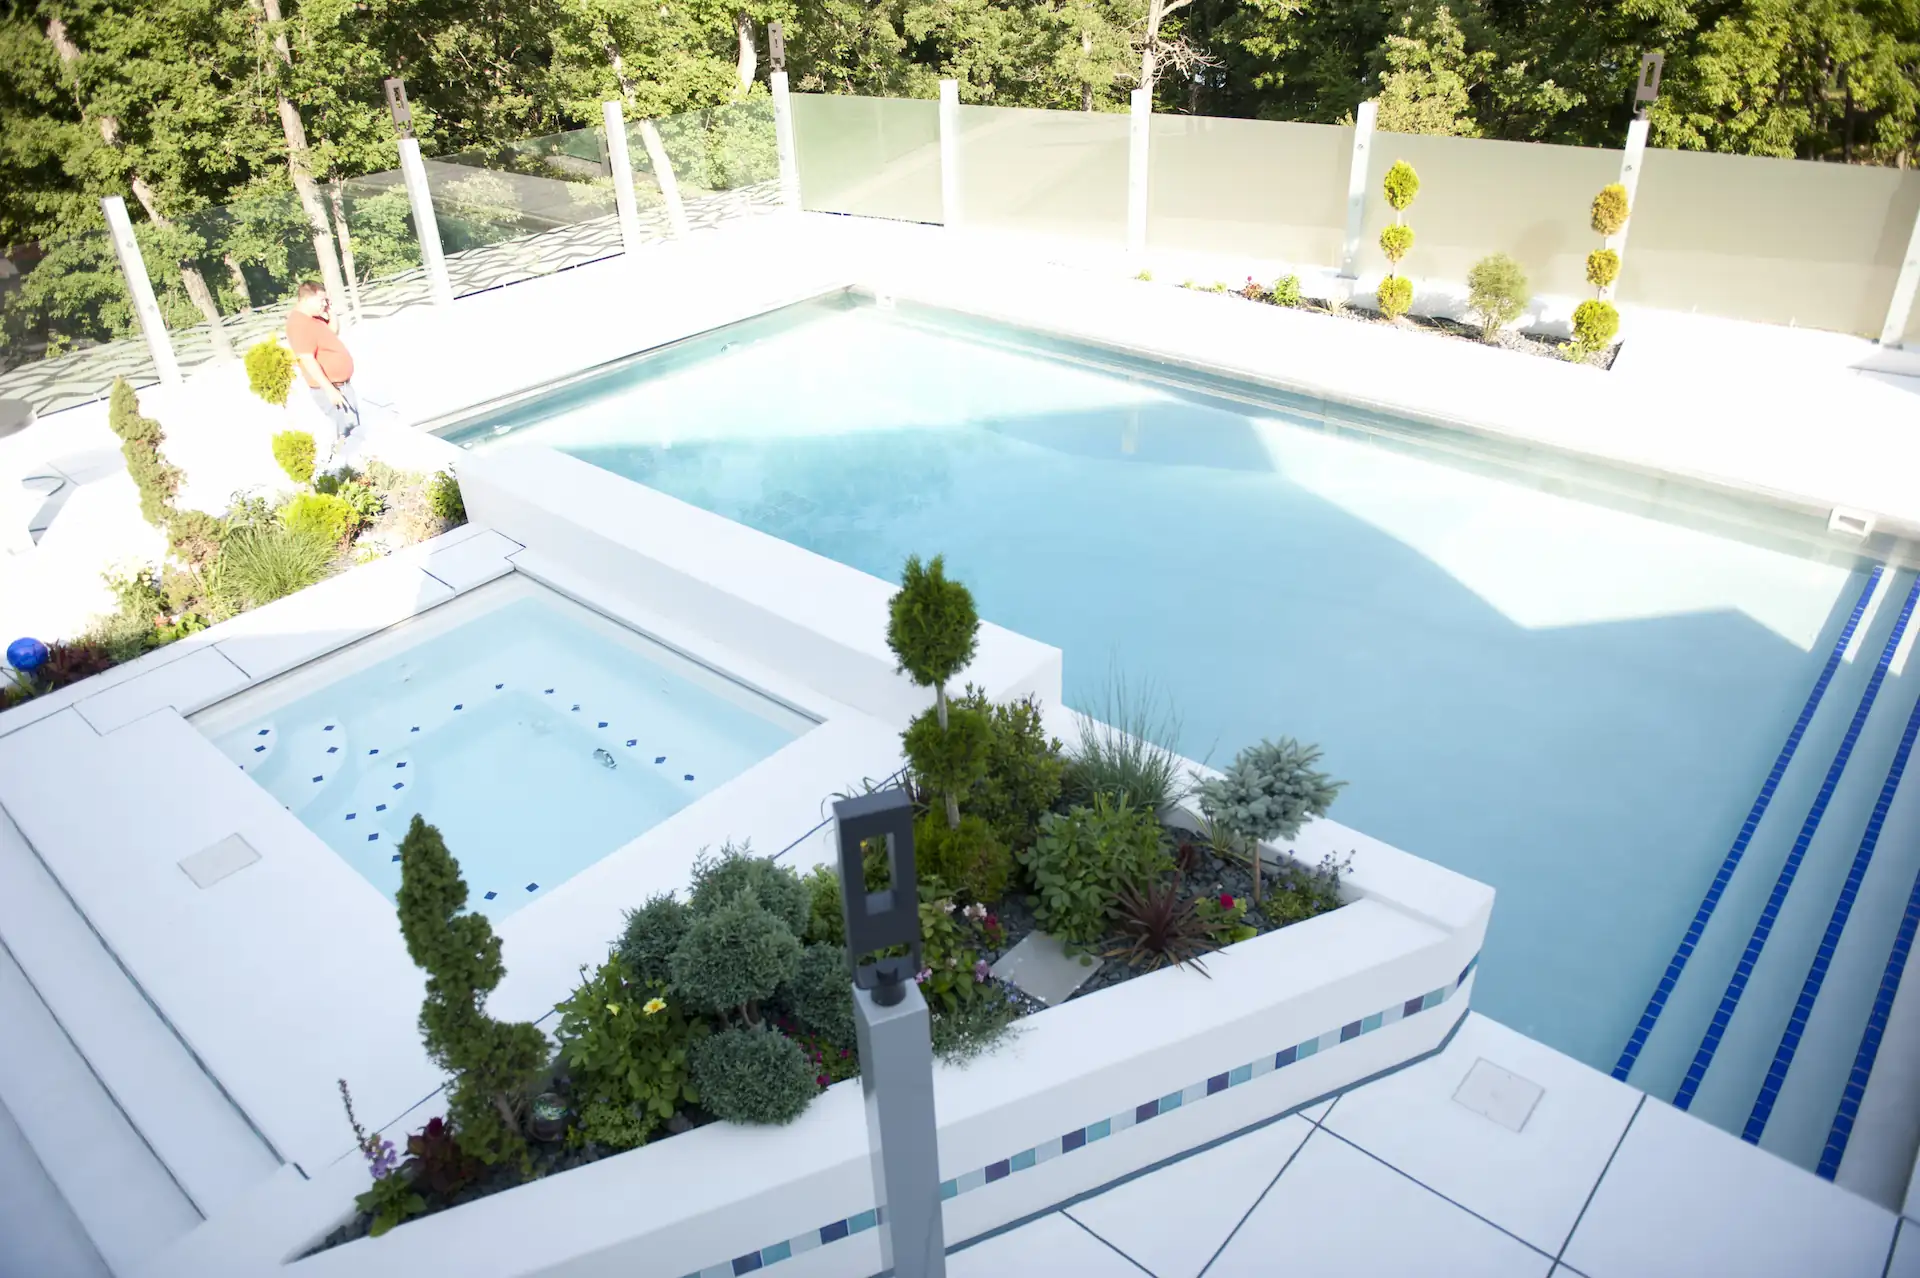 A concrete pool deck stamped with a crisp, white tile pattern surrounds a rectangular inground pool and spa.